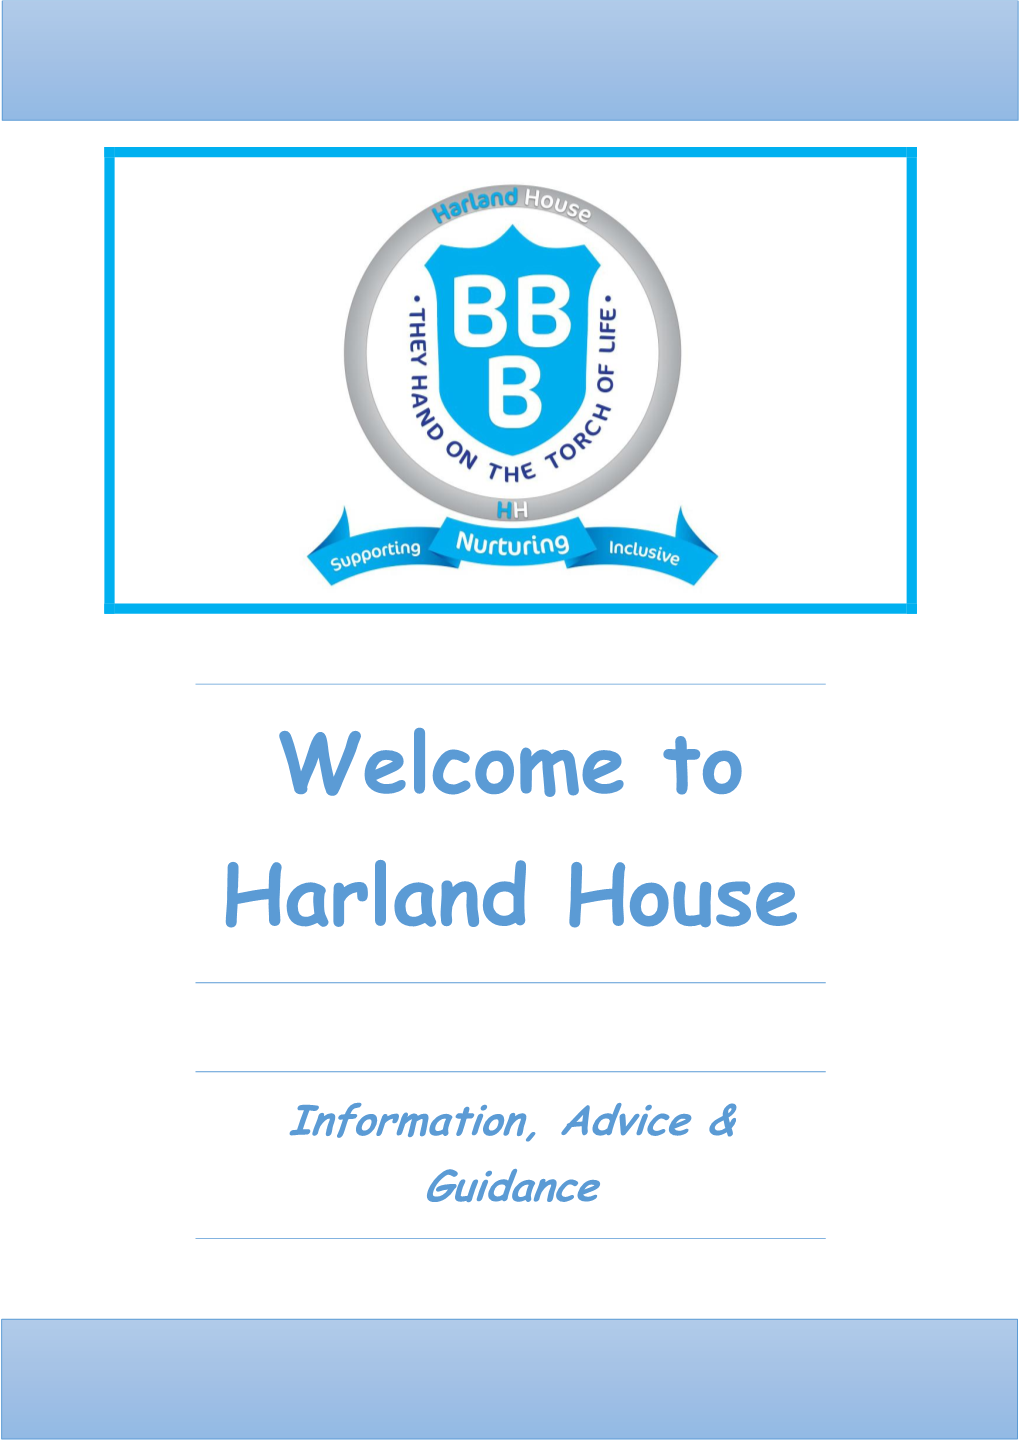 Welcome to Harland House